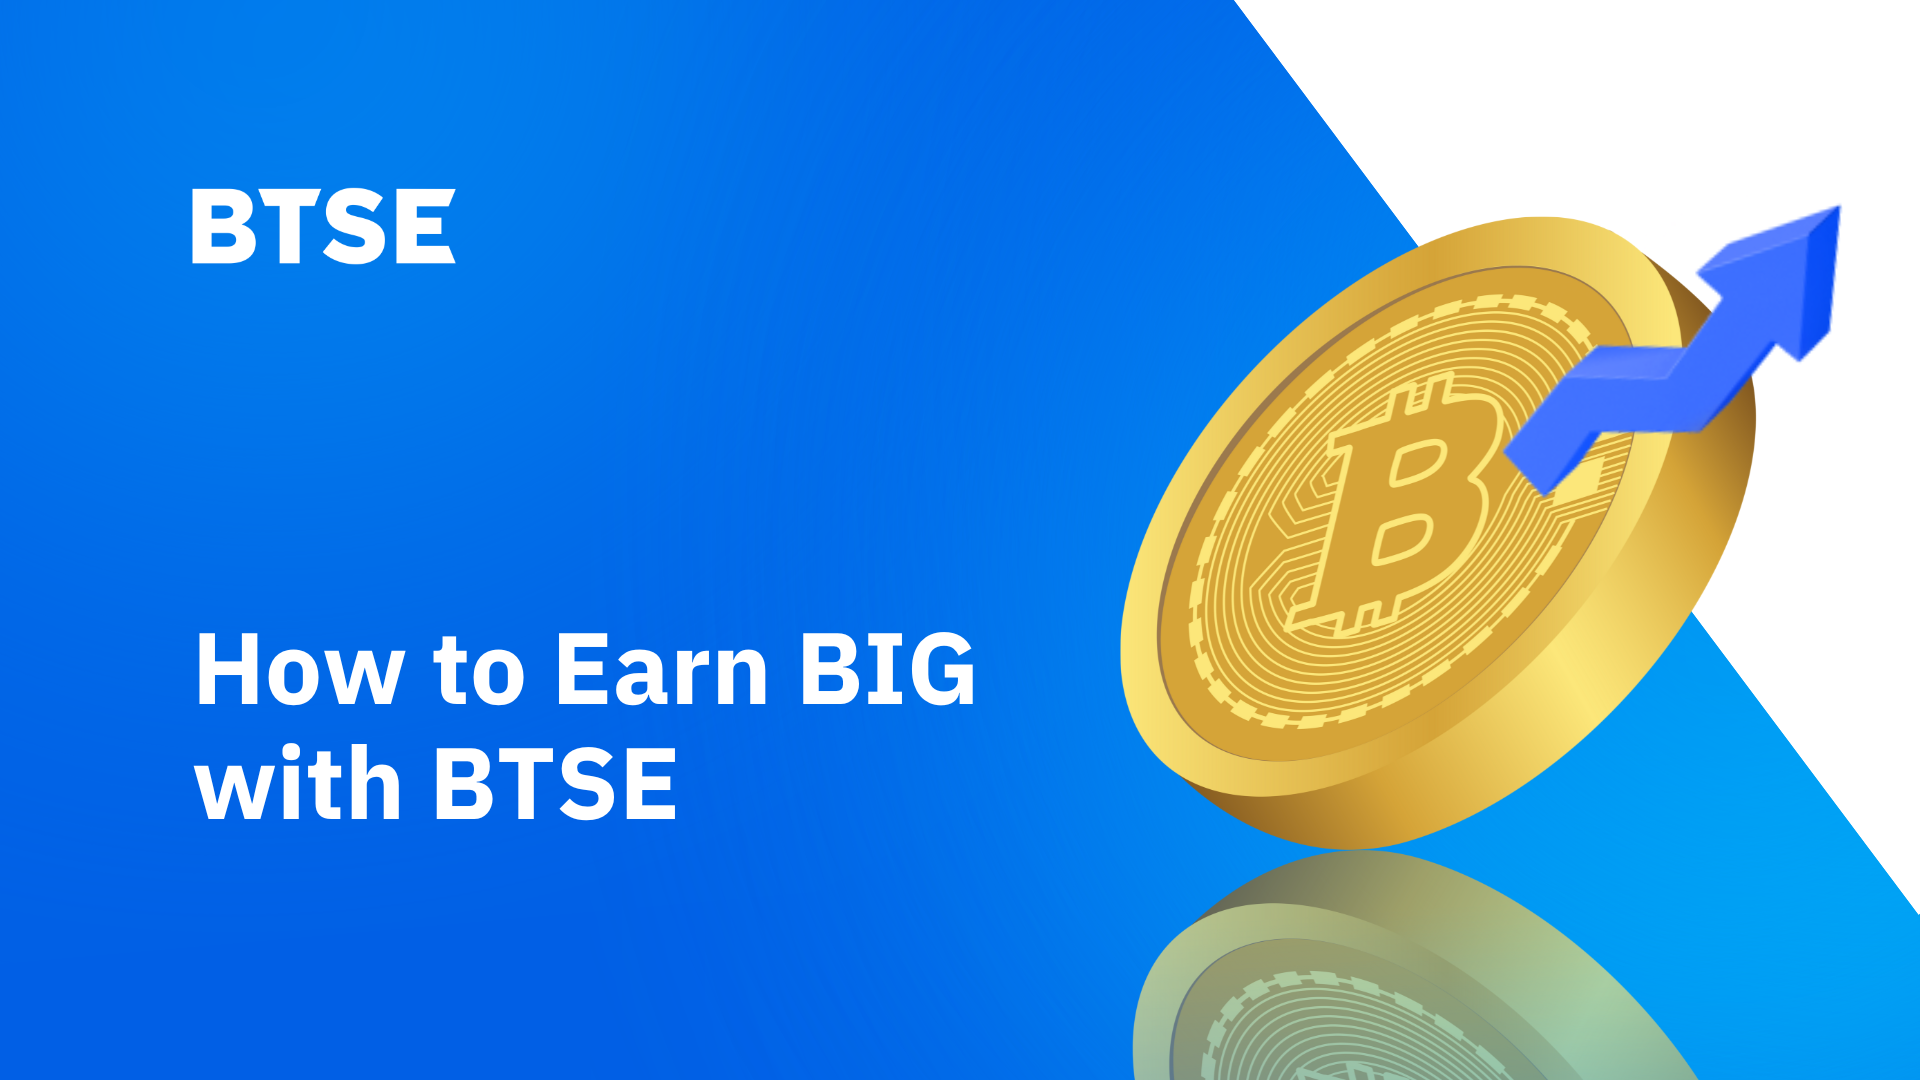 How to earn big with BTSE